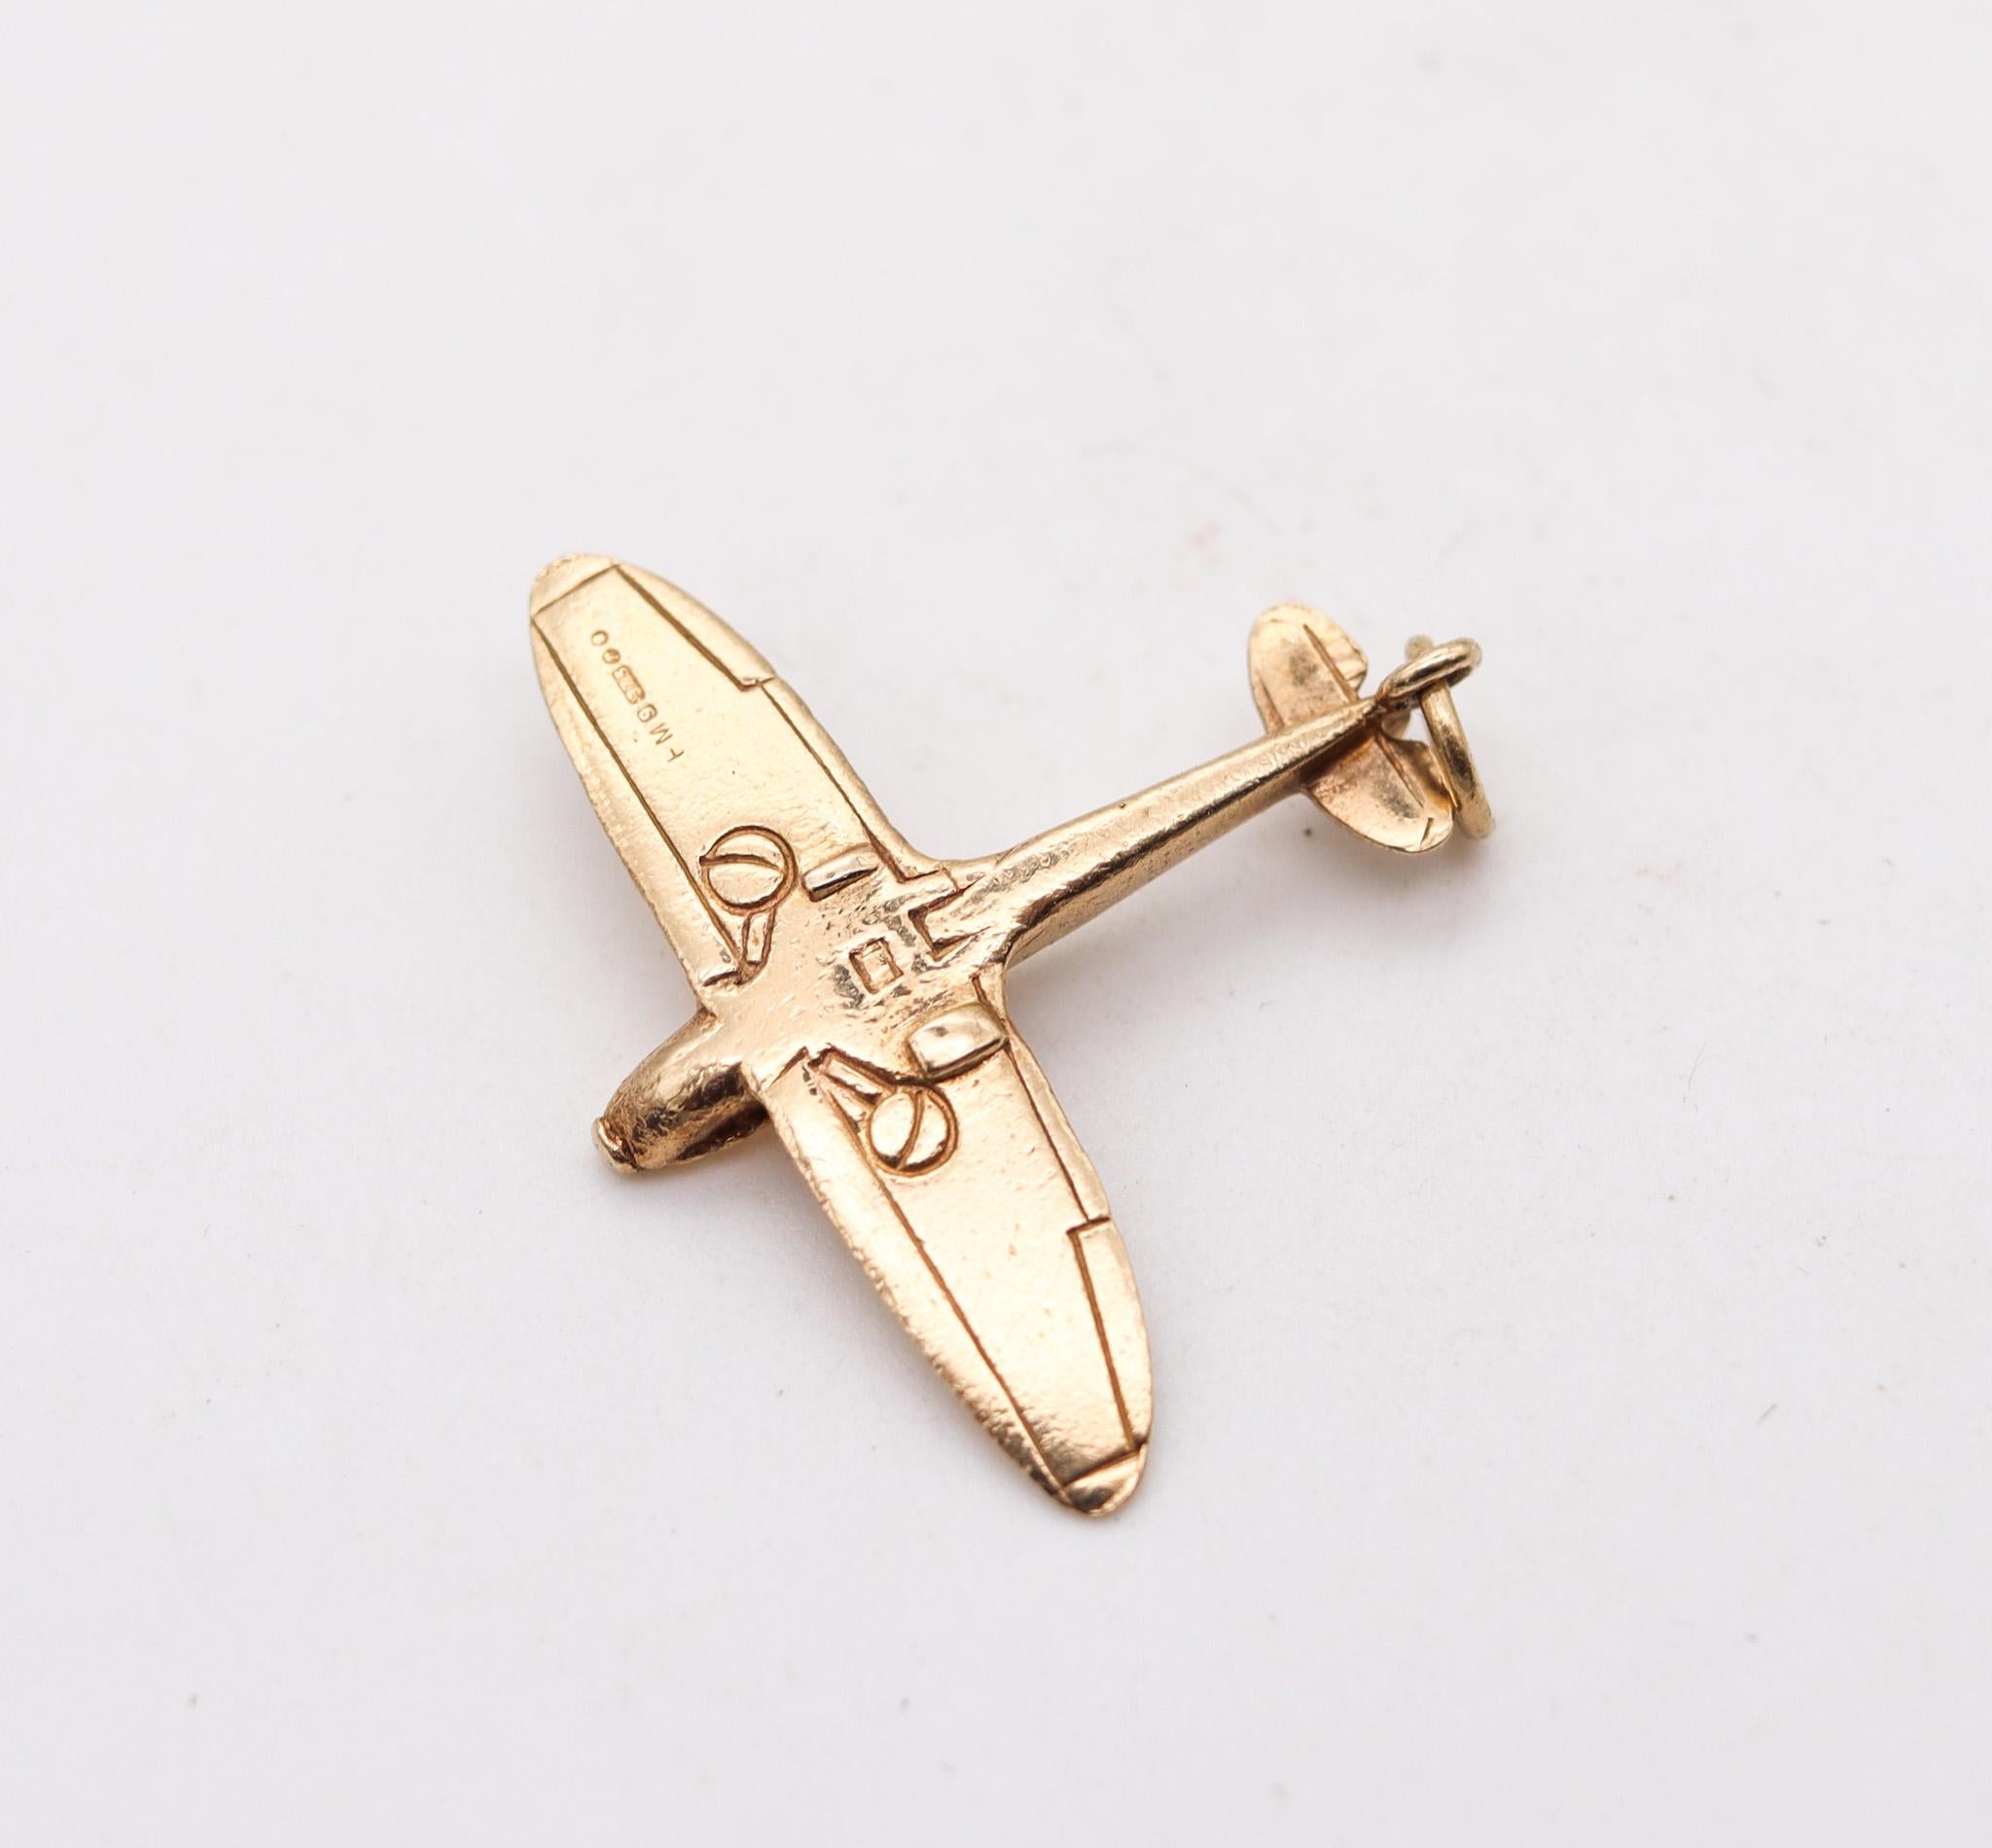 Post-War England 1950 Post War Enameled Airplane Pendant Charm In 9Kt Yellow Gold For Sale